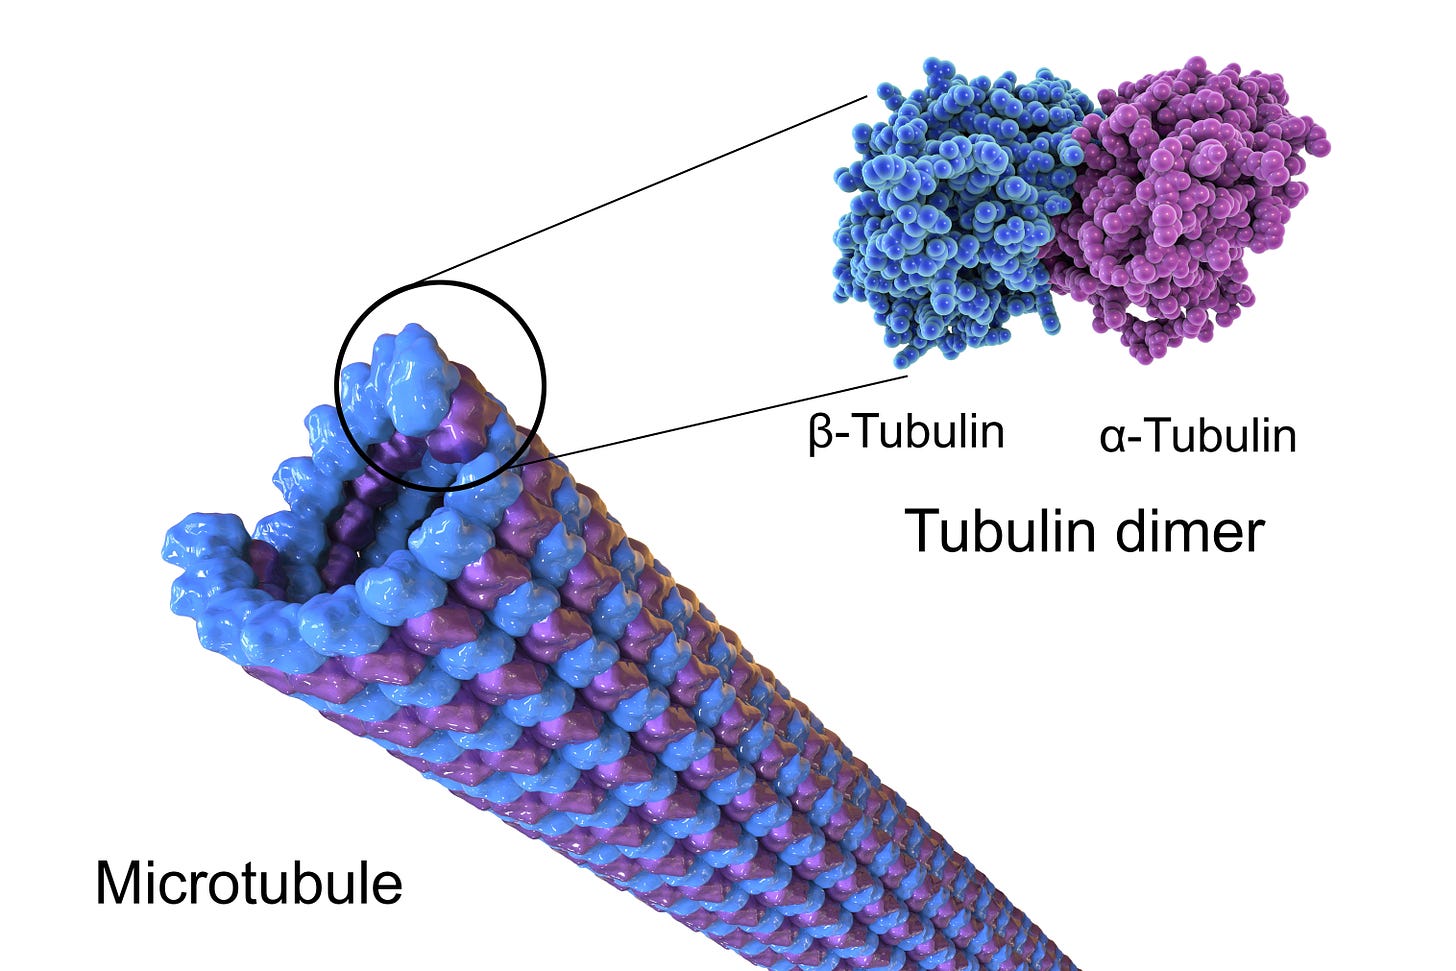 Microtubule arrange in a helical spiral